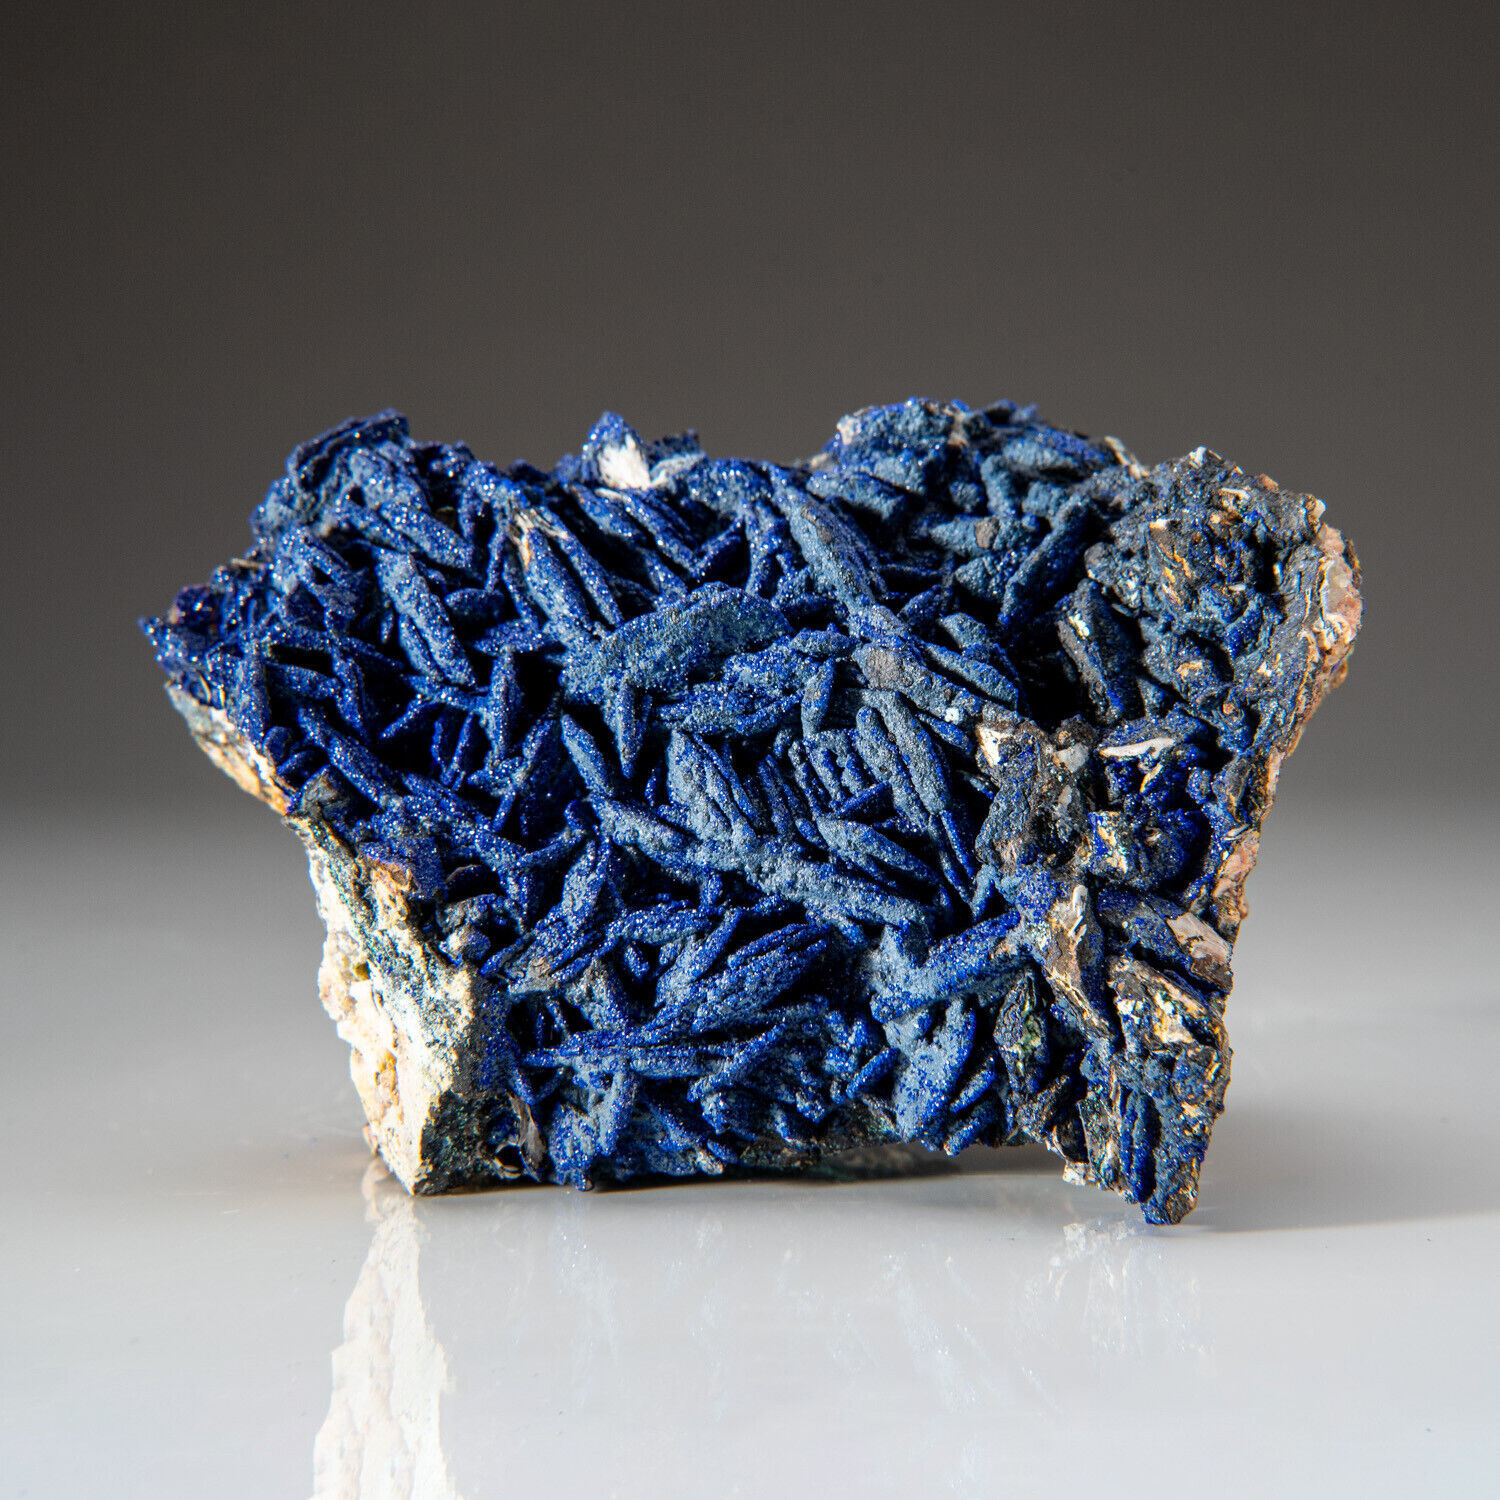 Azurite and Malachite from Ahouli Mines, Midelt Province, Morocco